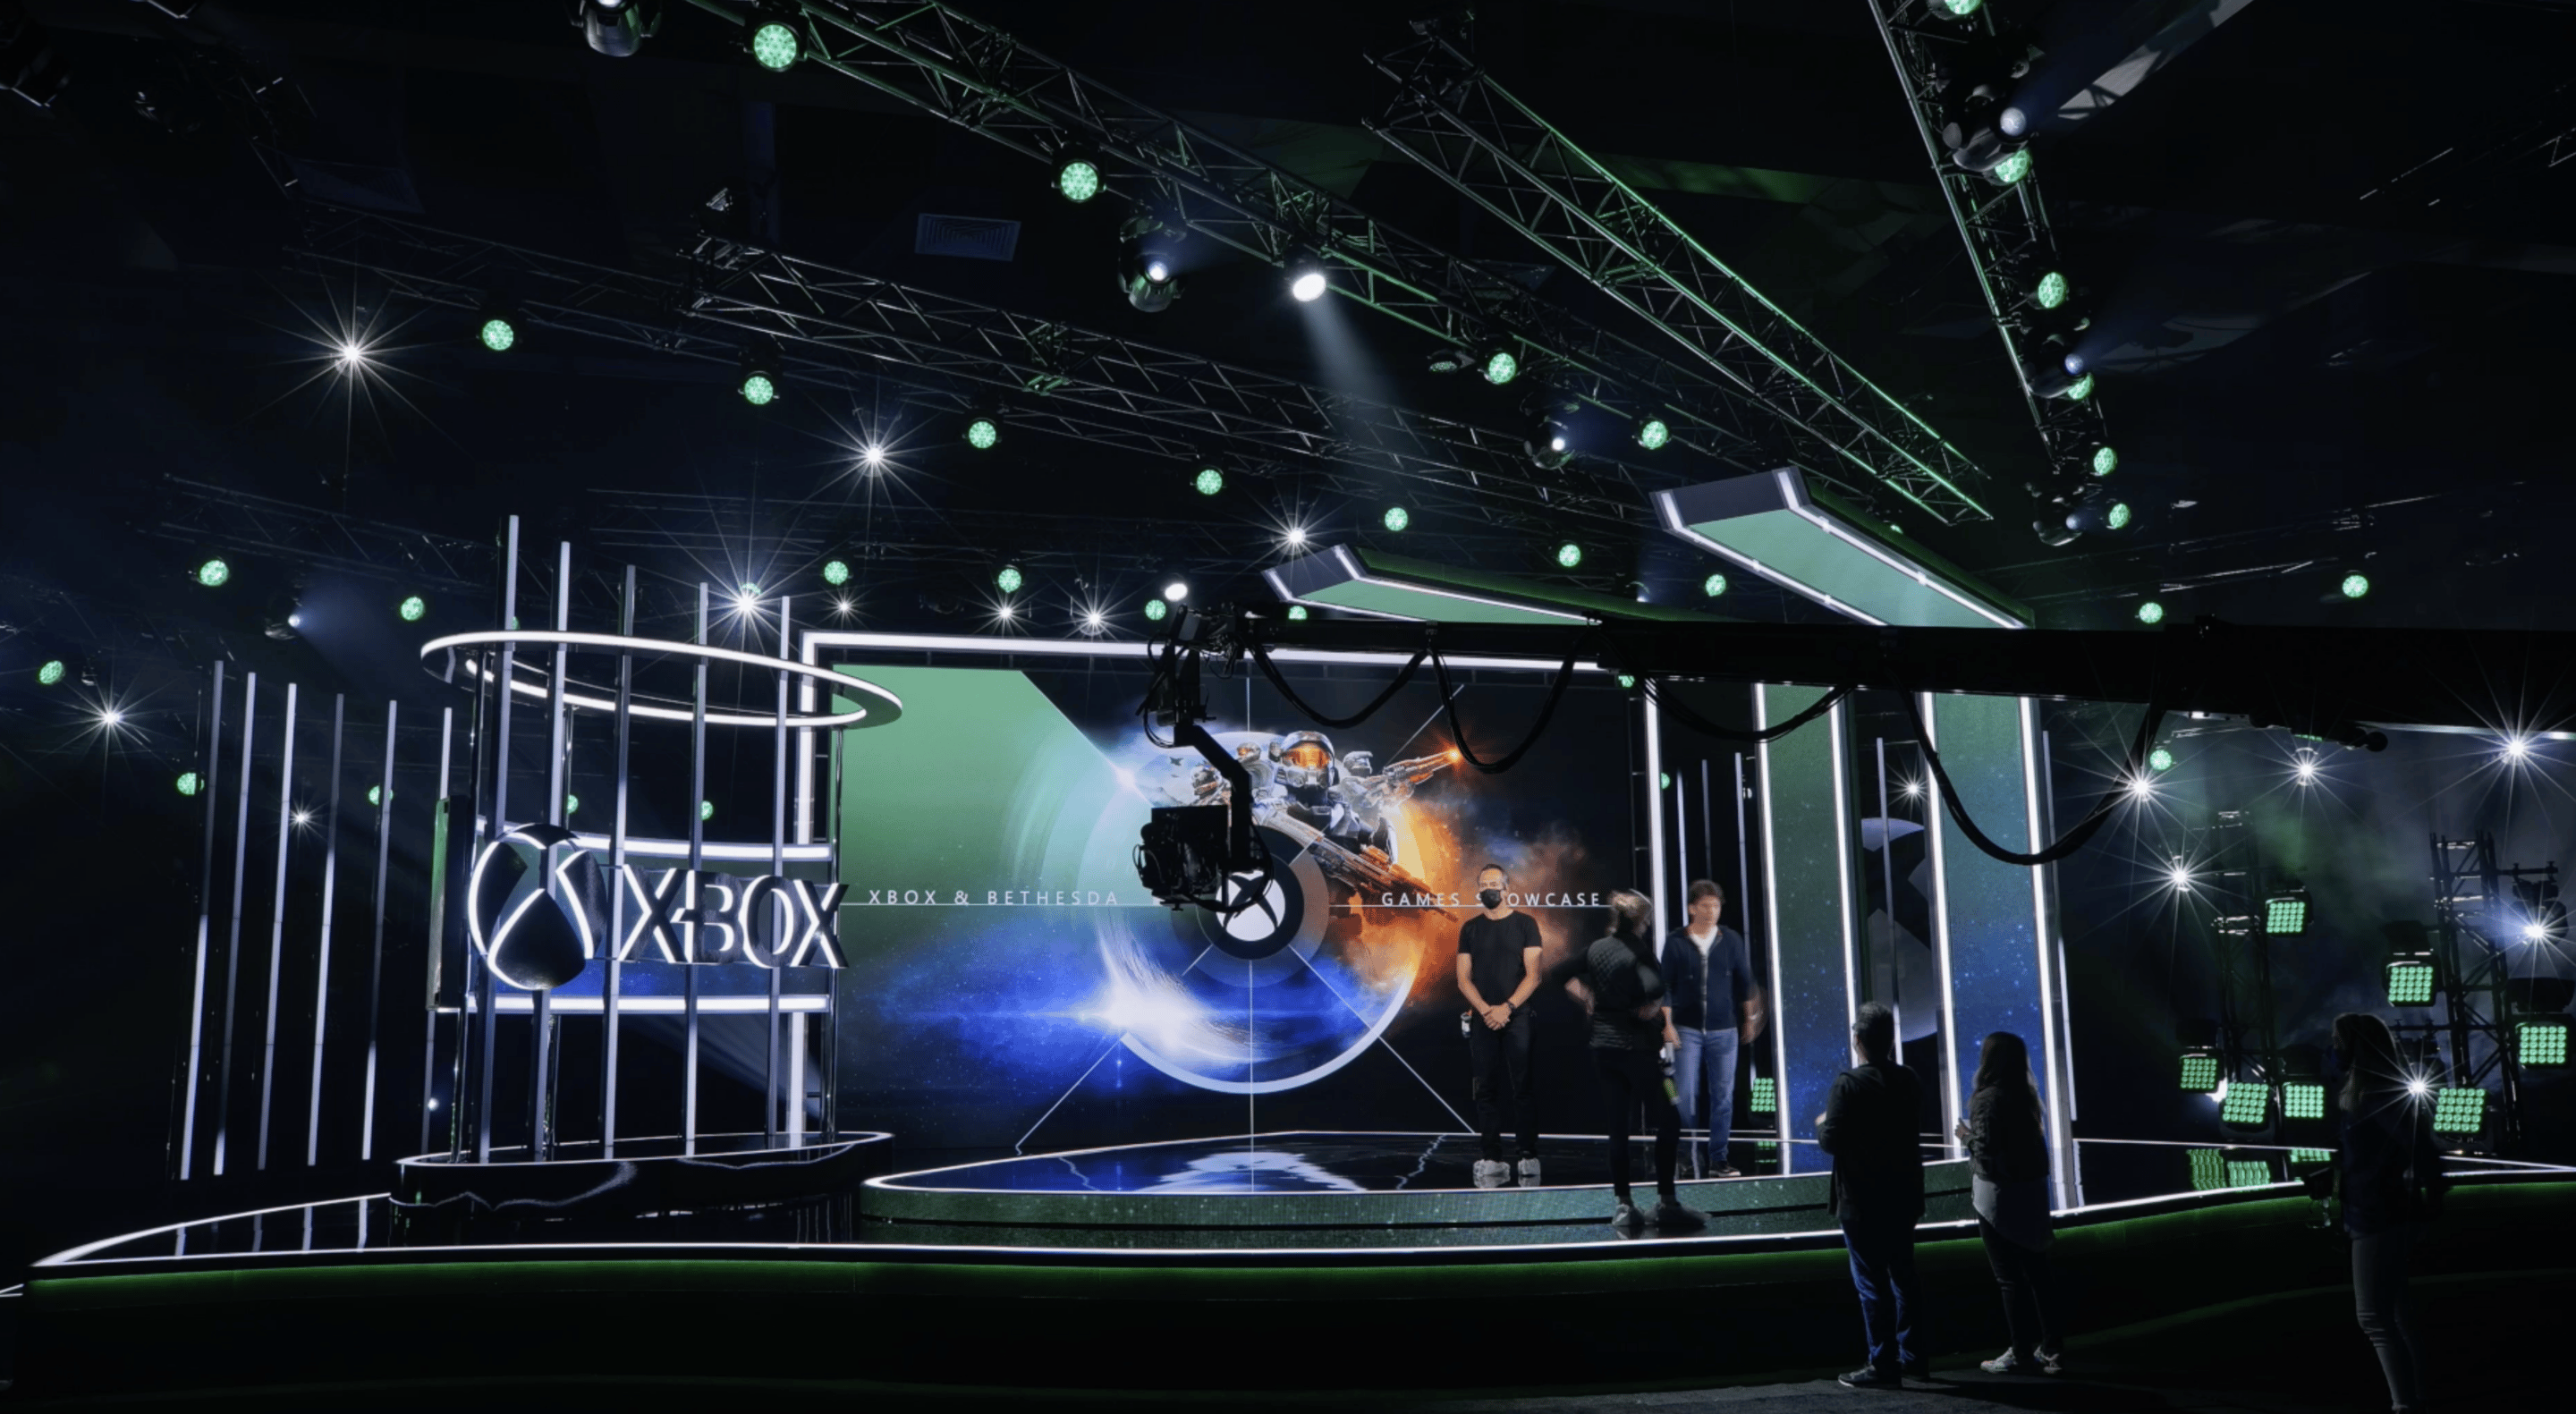 People standing on stage in front of the Xbox Showcase screen 